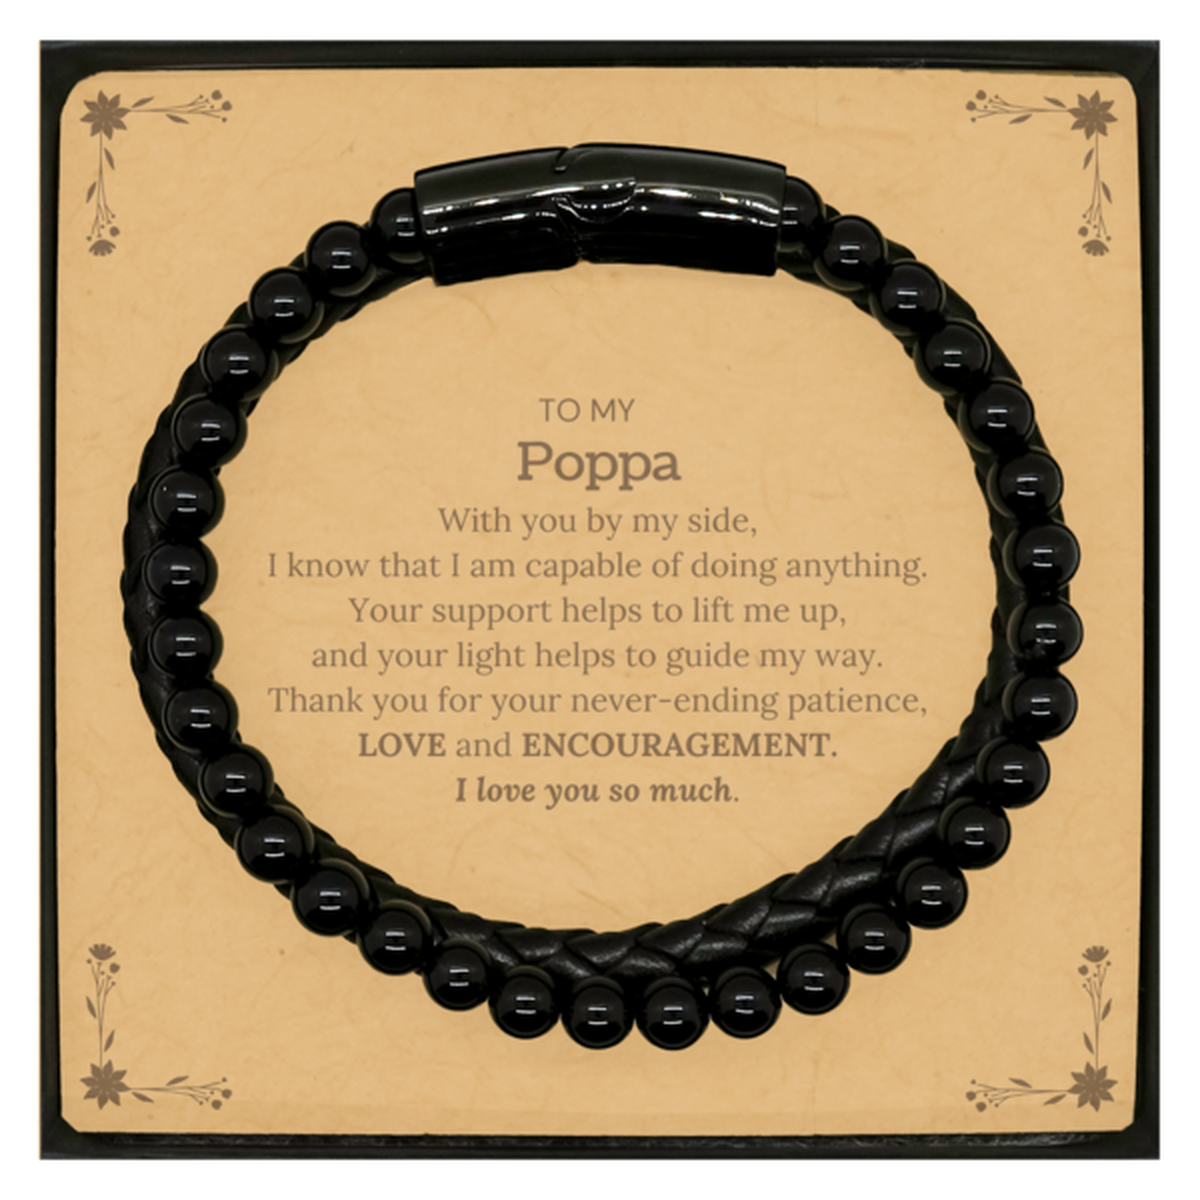 Appreciation Poppa Stone Leather Bracelets Gifts, To My Poppa Birthday Christmas Wedding Keepsake Gifts for Poppa With you by my side, I know that I am capable of doing anything. I love you so much